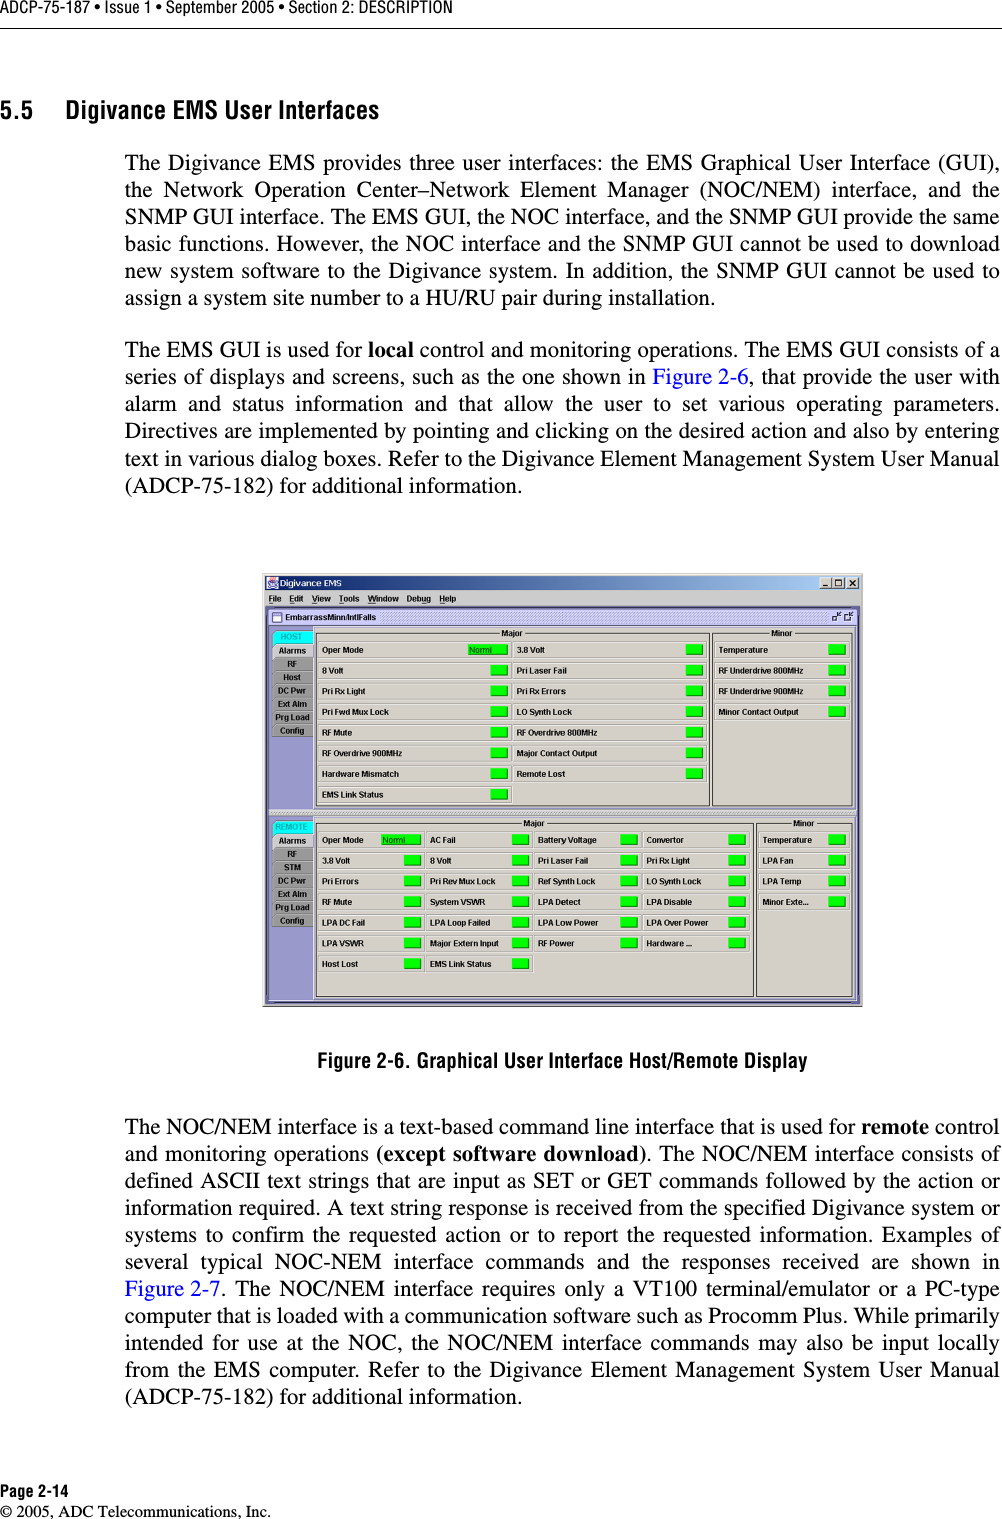 ADCP-75-187 • Issue 1 • September 2005 • Section 2: DESCRIPTIONPage 2-14© 2005, ADC Telecommunications, Inc.5.5 Digivance EMS User InterfacesThe Digivance EMS provides three user interfaces: the EMS Graphical User Interface (GUI),the Network Operation Center–Network Element Manager (NOC/NEM) interface, and theSNMP GUI interface. The EMS GUI, the NOC interface, and the SNMP GUI provide the samebasic functions. However, the NOC interface and the SNMP GUI cannot be used to downloadnew system software to the Digivance system. In addition, the SNMP GUI cannot be used toassign a system site number to a HU/RU pair during installation. The EMS GUI is used for local control and monitoring operations. The EMS GUI consists of aseries of displays and screens, such as the one shown in Figure 2-6, that provide the user withalarm and status information and that allow the user to set various operating parameters.Directives are implemented by pointing and clicking on the desired action and also by enteringtext in various dialog boxes. Refer to the Digivance Element Management System User Manual(ADCP-75-182) for additional information. Figure 2-6. Graphical User Interface Host/Remote DisplayThe NOC/NEM interface is a text-based command line interface that is used for remote controland monitoring operations (except software download). The NOC/NEM interface consists ofdefined ASCII text strings that are input as SET or GET commands followed by the action orinformation required. A text string response is received from the specified Digivance system orsystems to confirm the requested action or to report the requested information. Examples ofseveral typical NOC-NEM interface commands and the responses received are shown inFigure 2-7. The NOC/NEM interface requires only a VT100 terminal/emulator or a PC-typecomputer that is loaded with a communication software such as Procomm Plus. While primarilyintended for use at the NOC, the NOC/NEM interface commands may also be input locallyfrom the EMS computer. Refer to the Digivance Element Management System User Manual(ADCP-75-182) for additional information. 